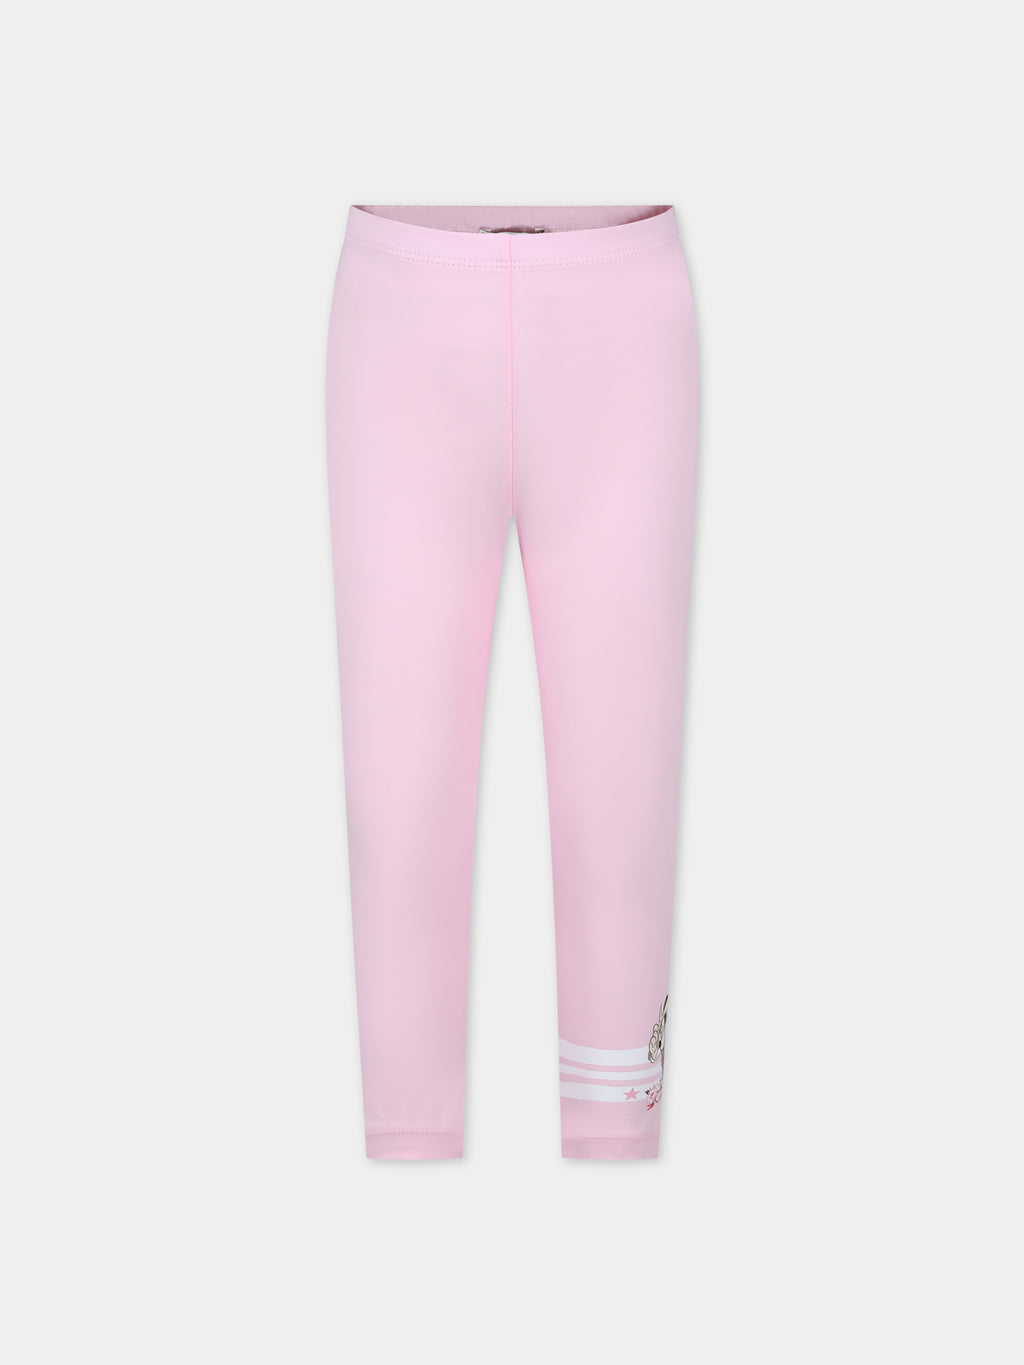 Pink leggings for girl with Minnie